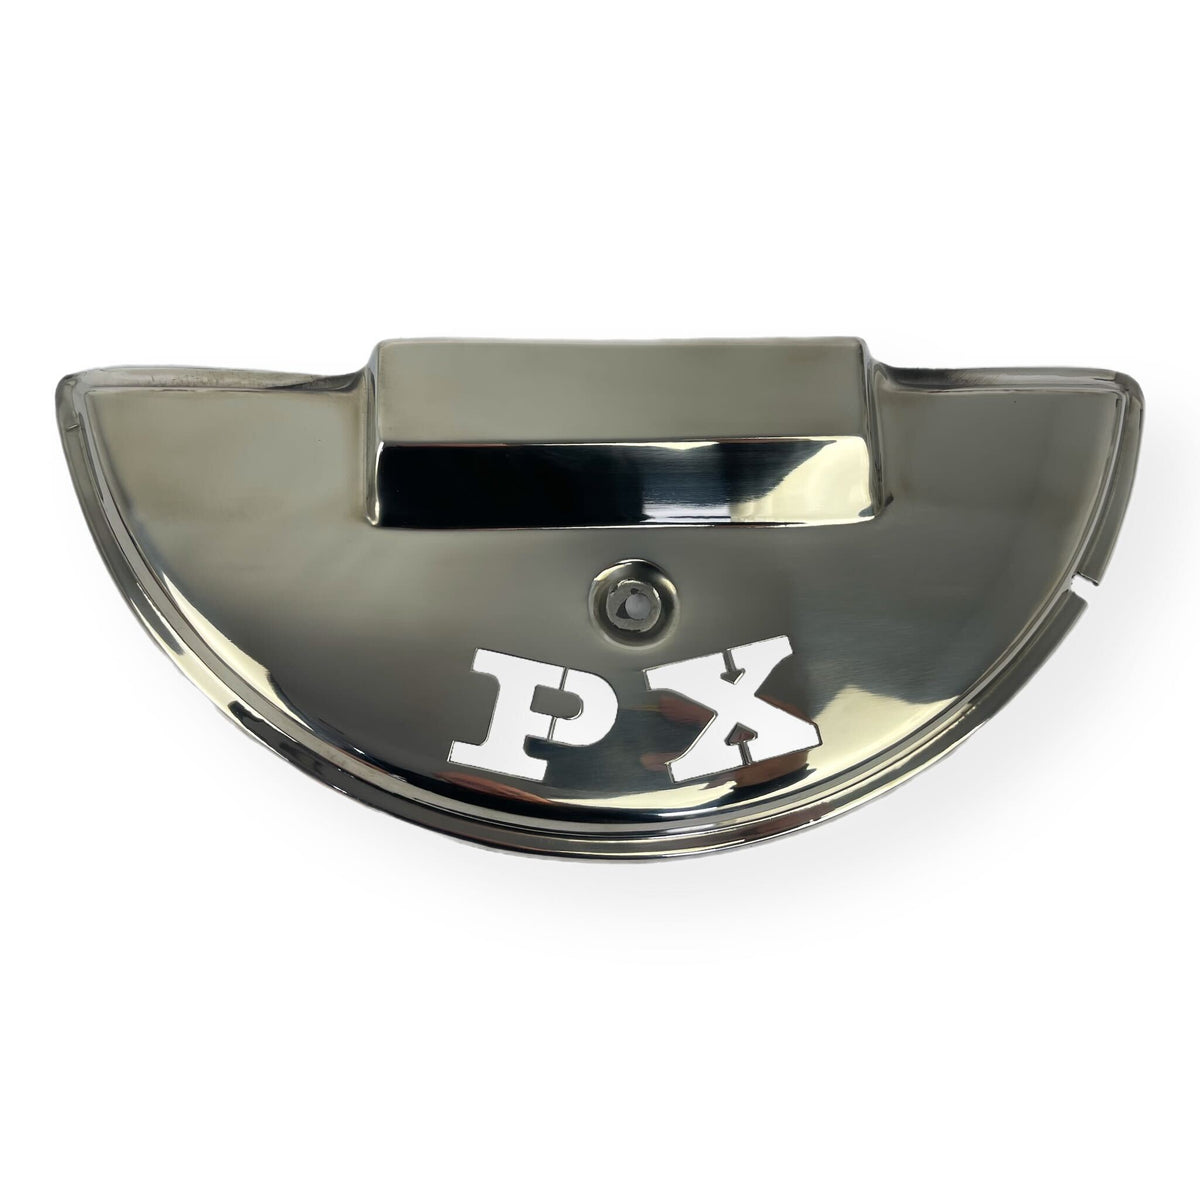 Vespa PX Spare Wheel Cover Laser Cut PX Logo - Polished Stainless Steel